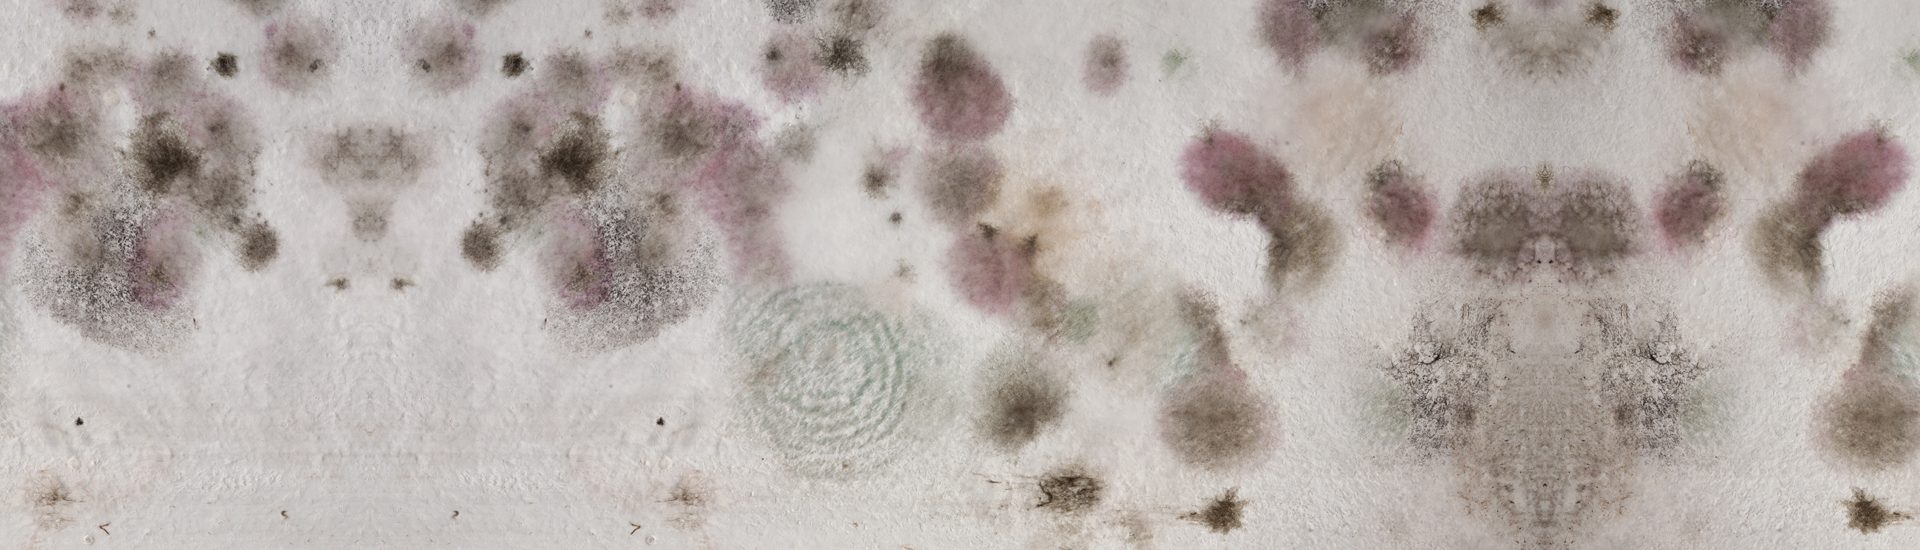 Mold Toxicity: Know It All